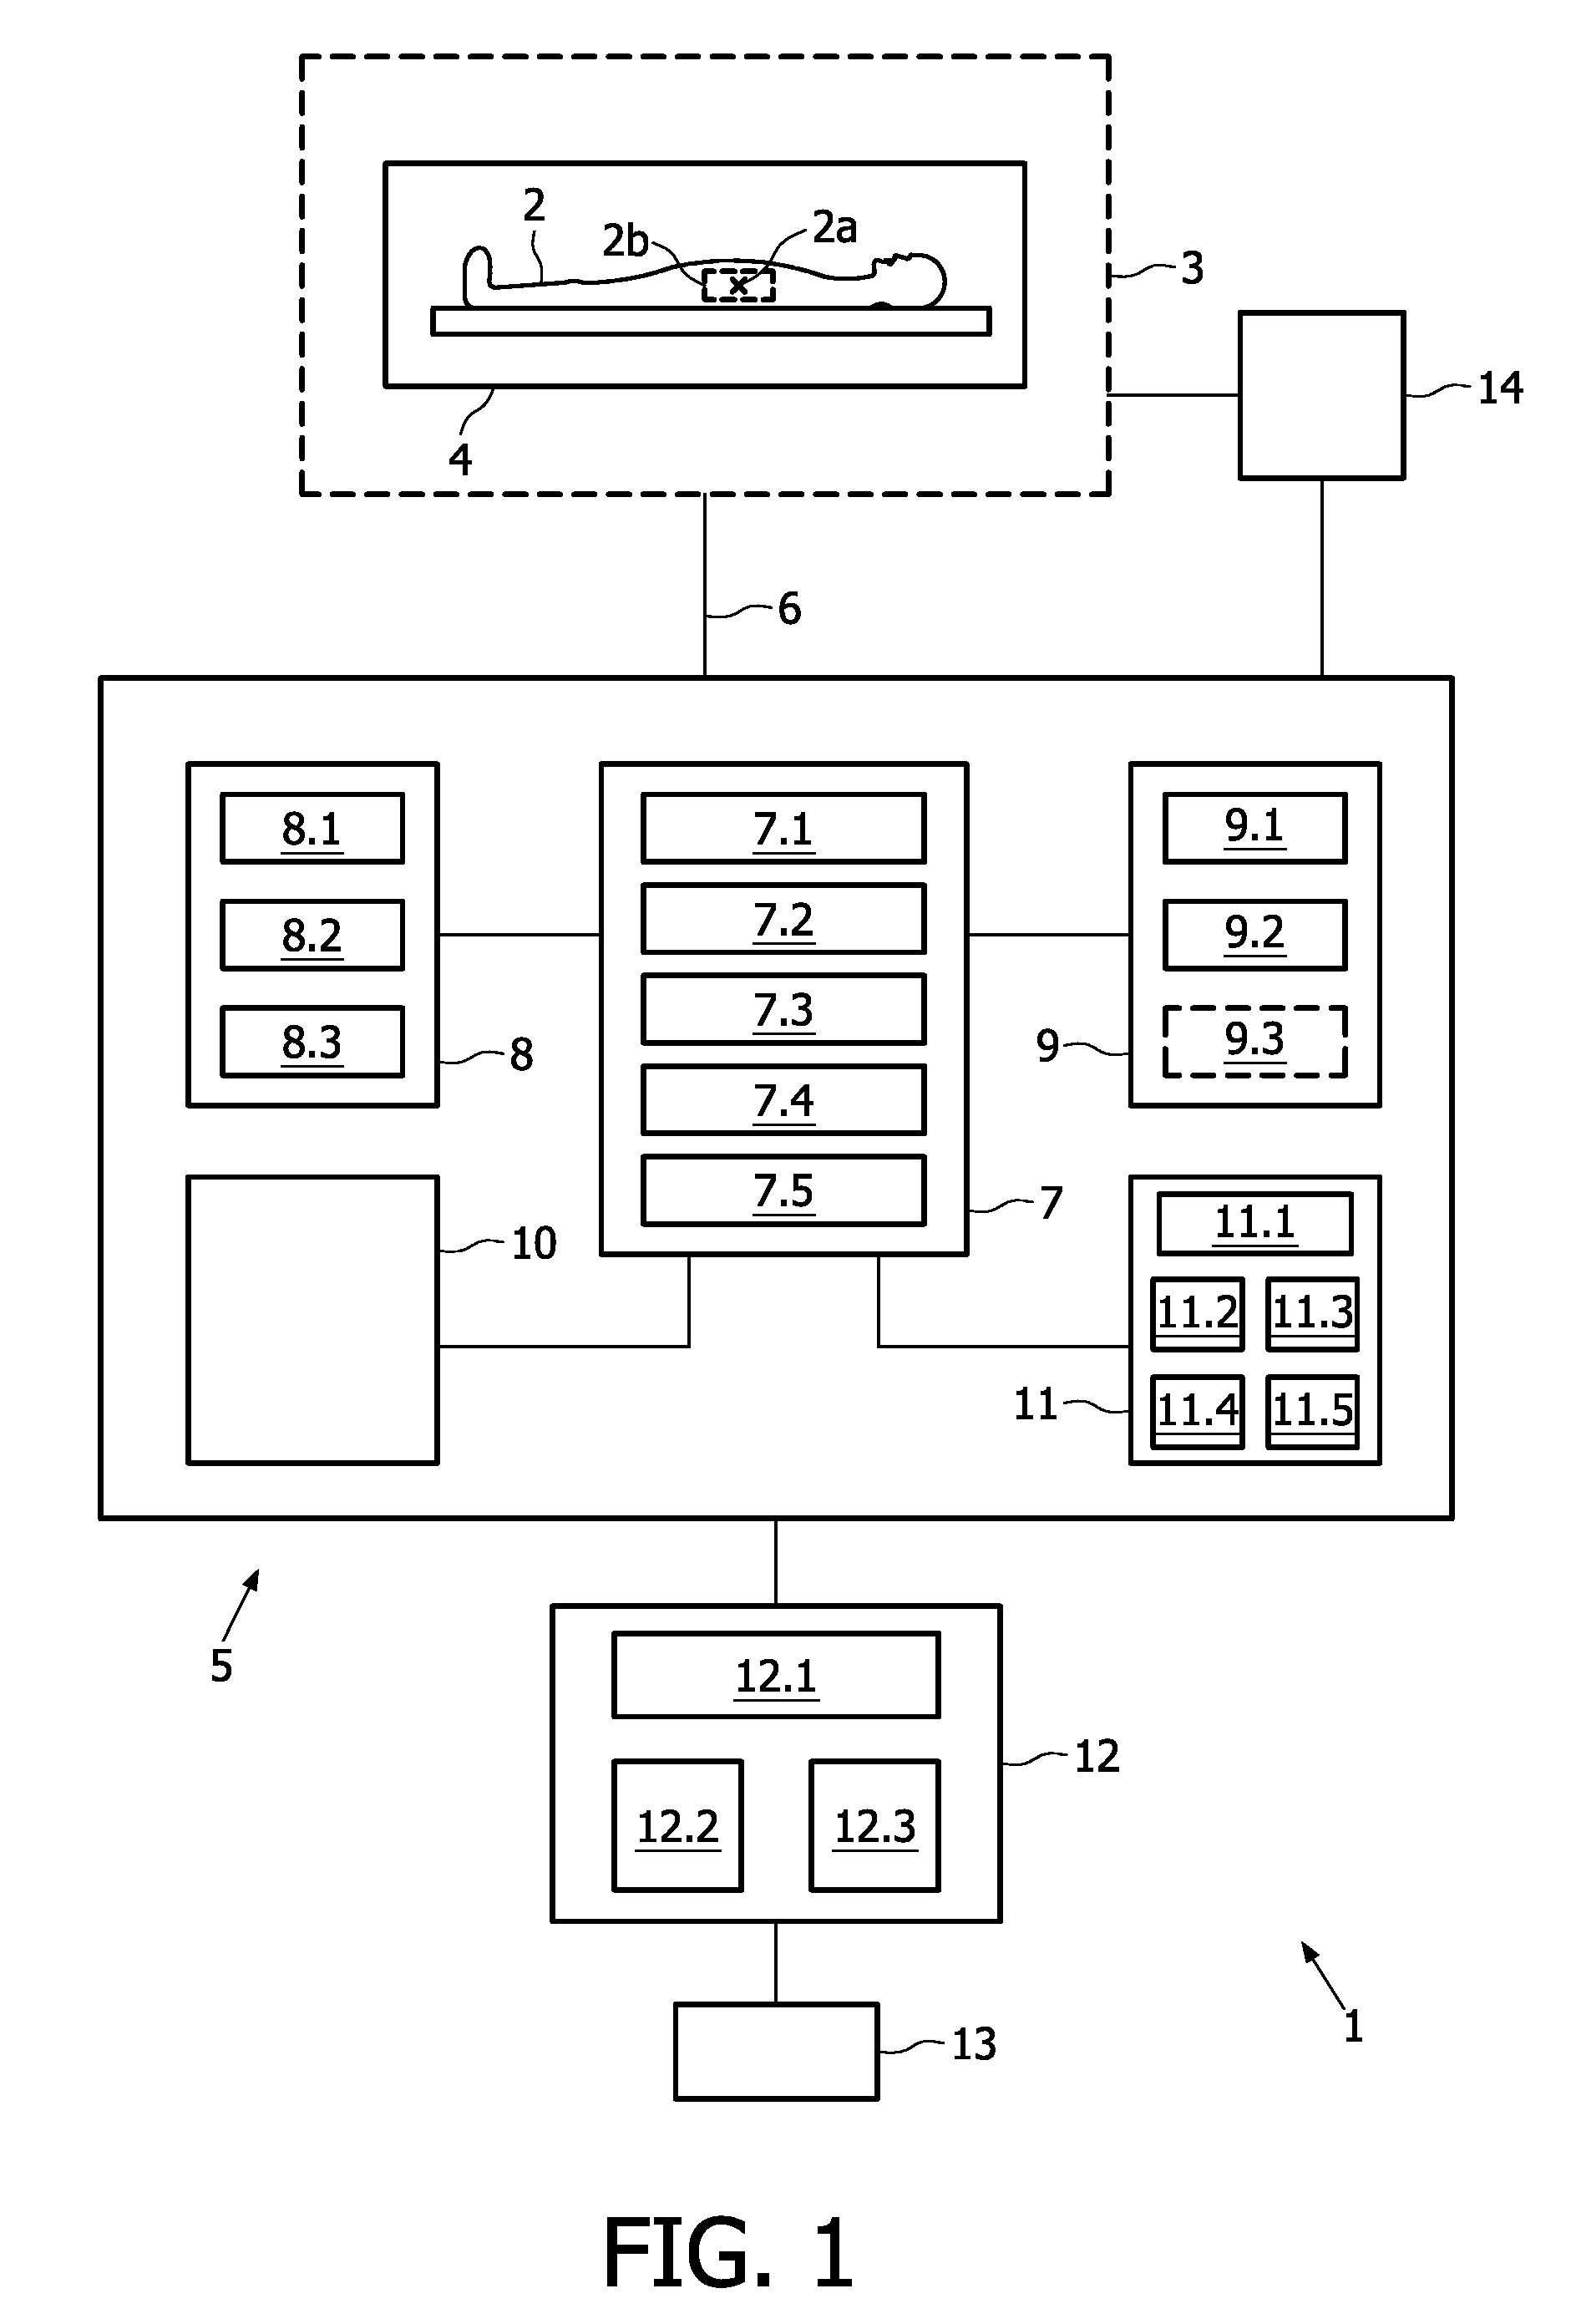 System and method for acquiring magnetic resonance imaging (MRI) data